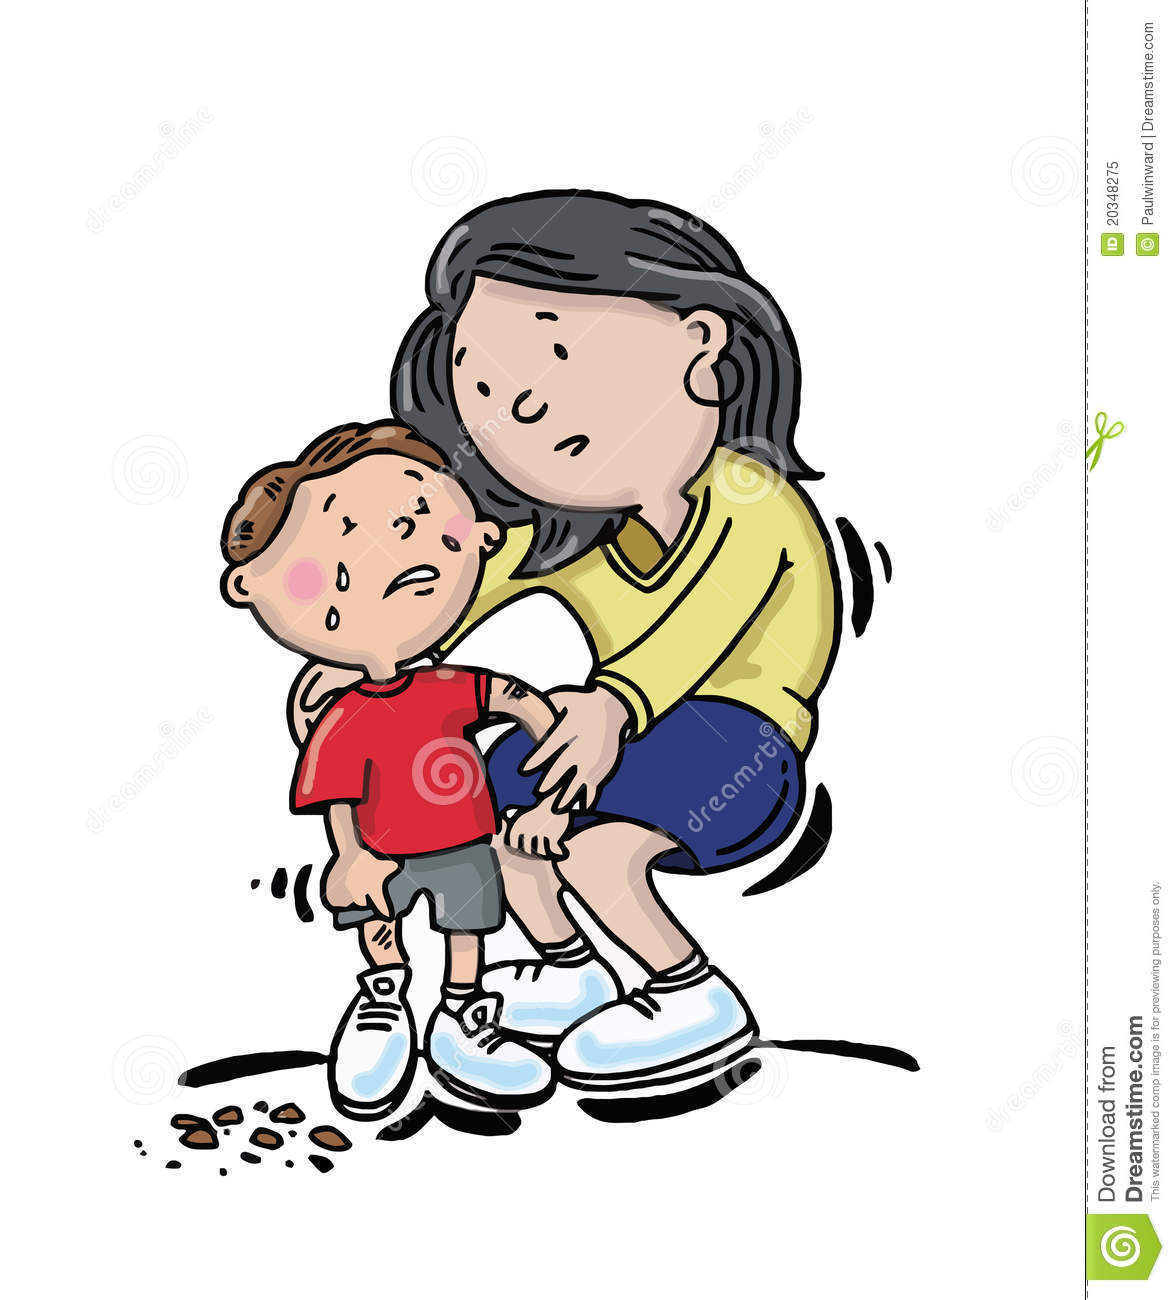 Child With Sore Knee Royalty Free Stock Photo   Image  20348275